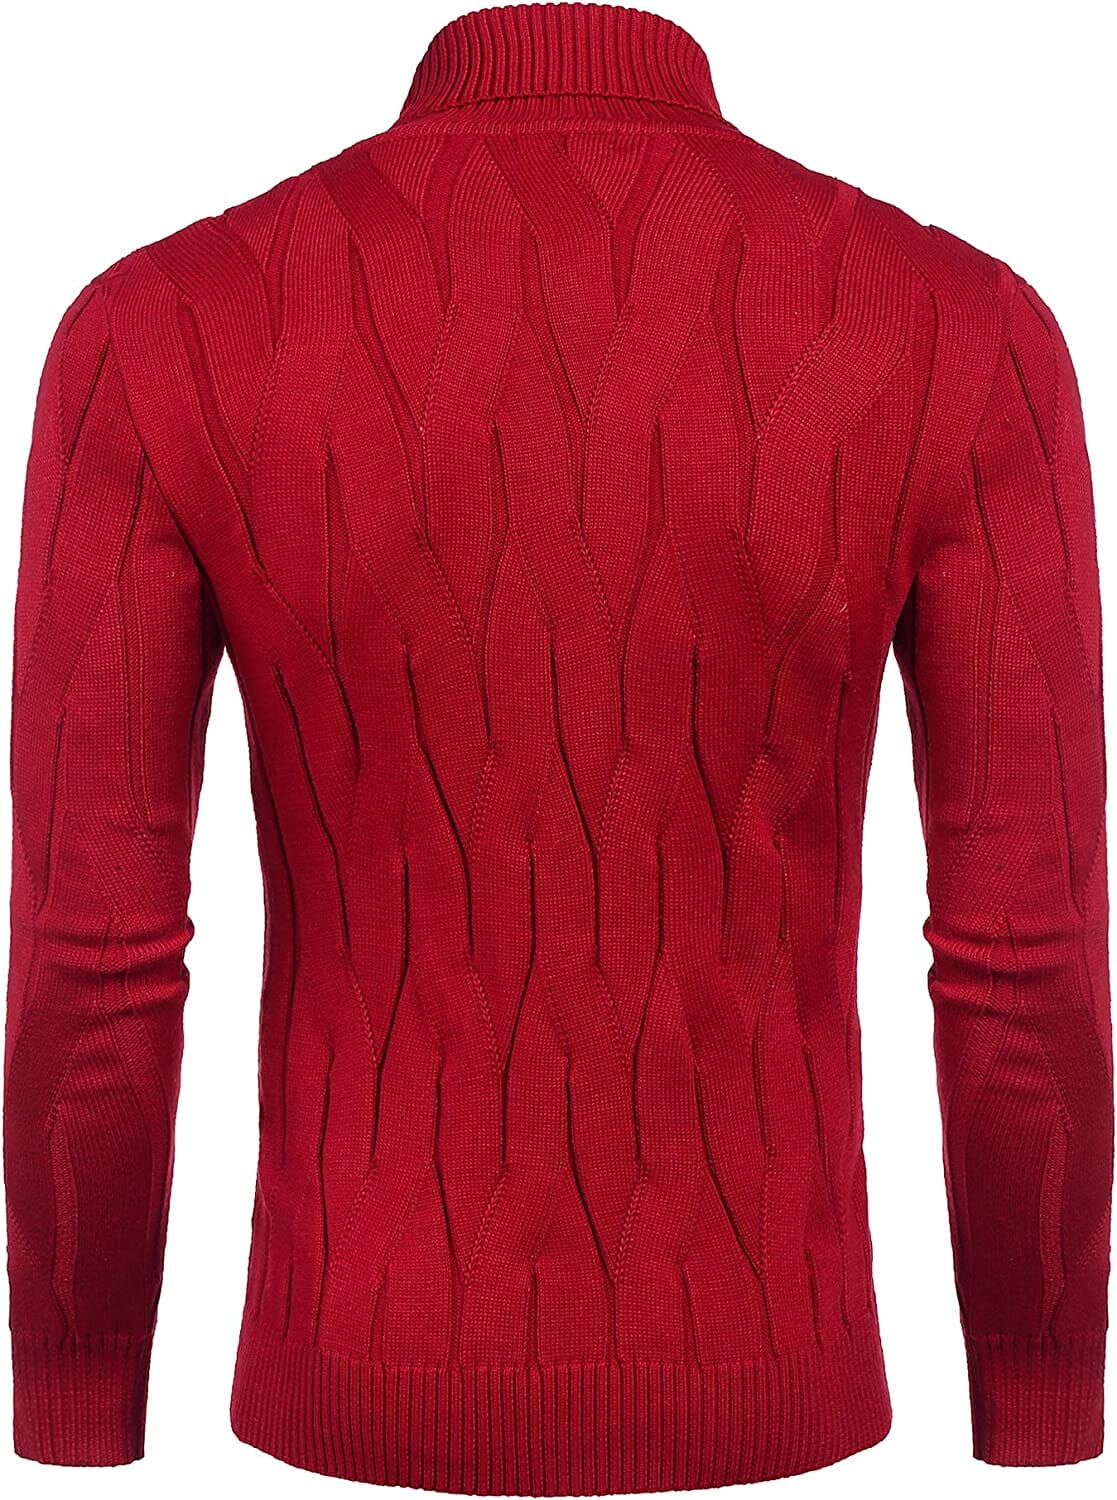 Slim Fit Turtleneck Knitted Pullover Sweaters (US Only) Sweaters Coofandy's 